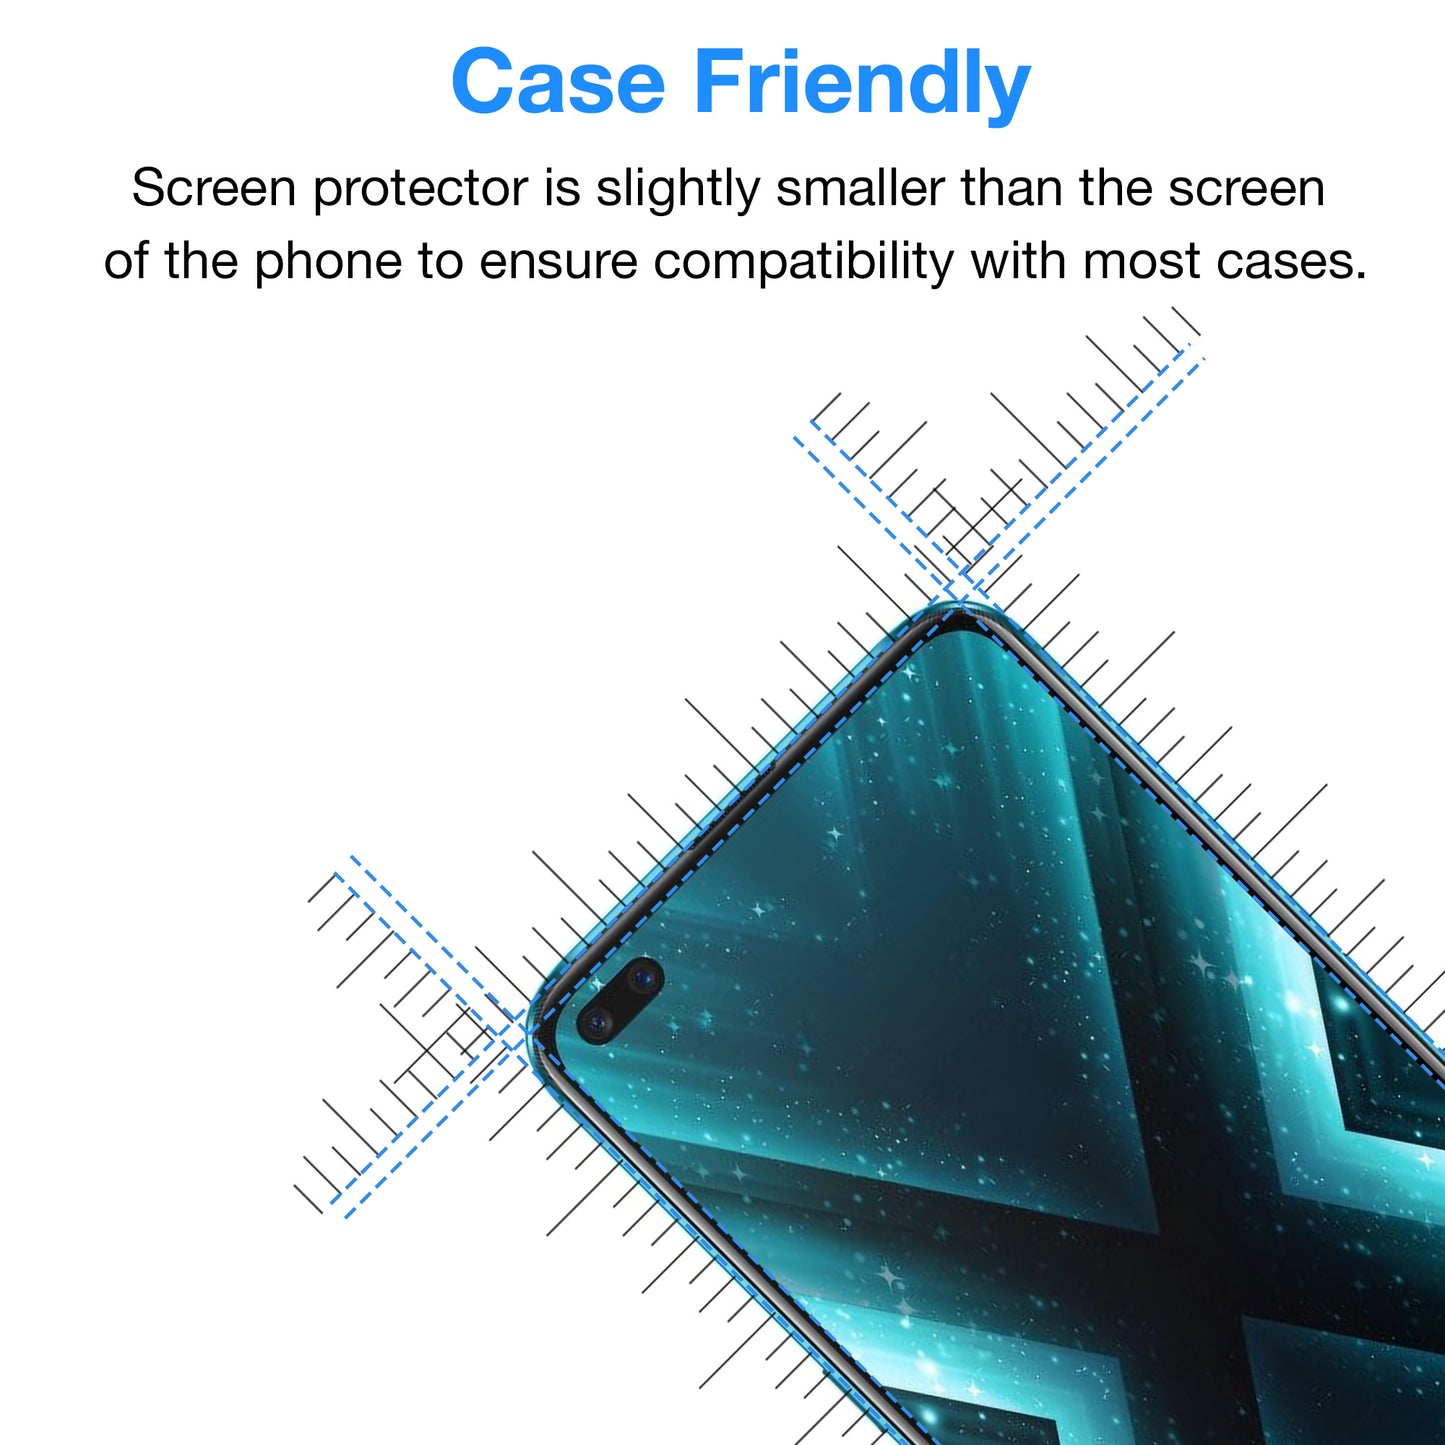 [3 Pack] MEZON Realme X3 SuperZoom Ultra Clear Screen Protector Case Friendly Film (Realme X3 SuperZoom, Clear)